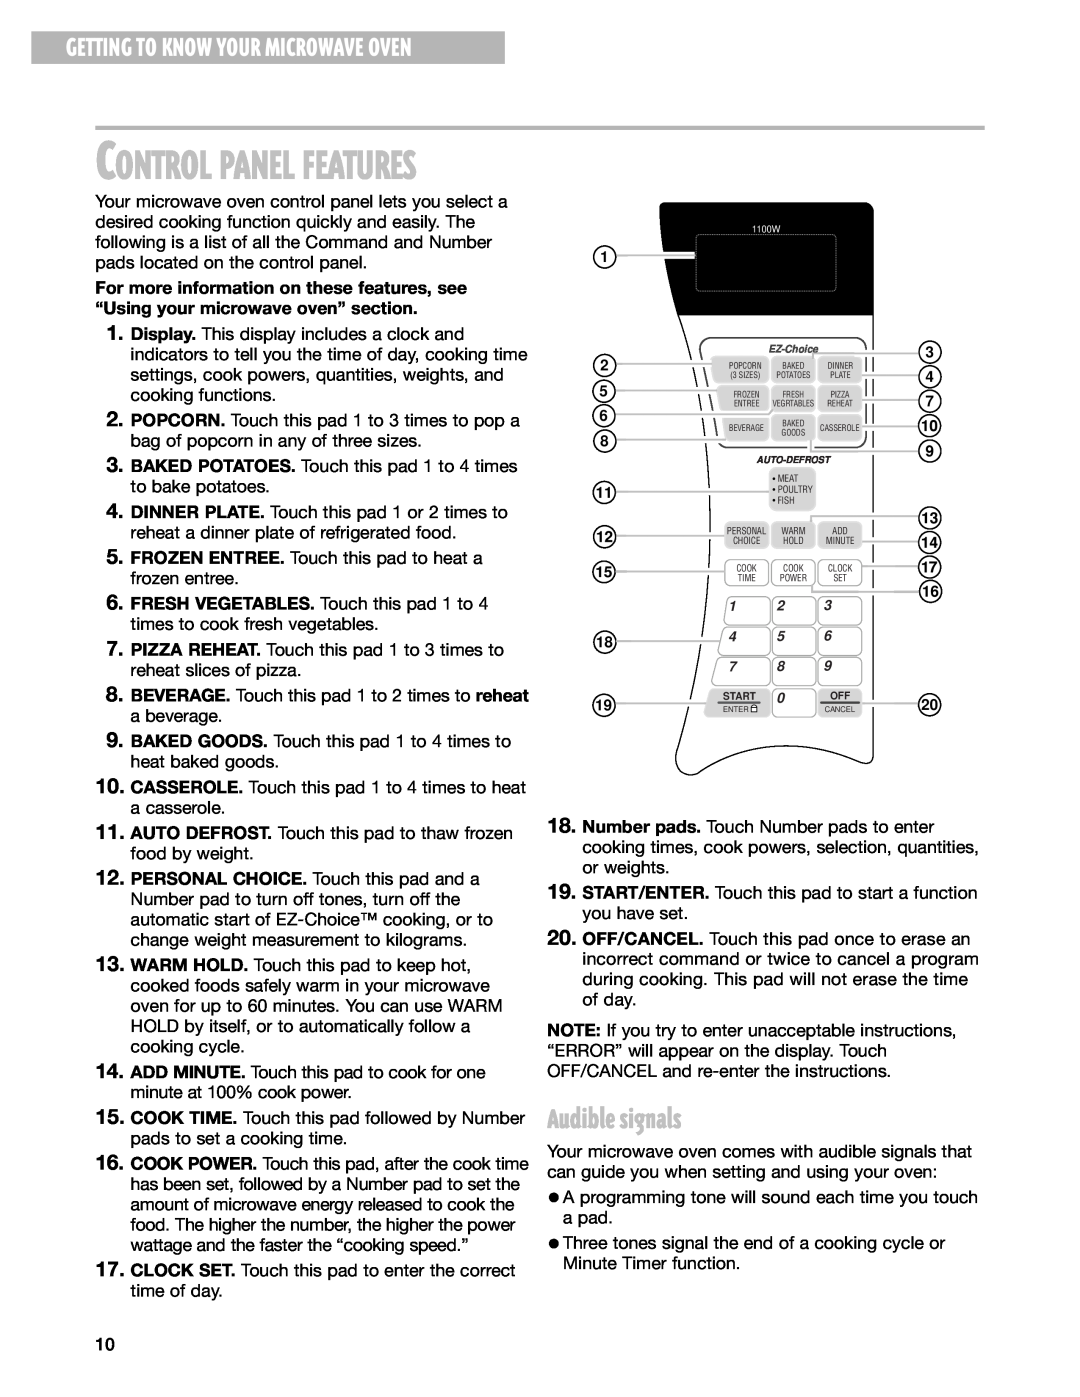 Whirlpool MT1100SH installation instructions Audible signals, Control Panel Features, Getting To Know Your Microwave Oven 